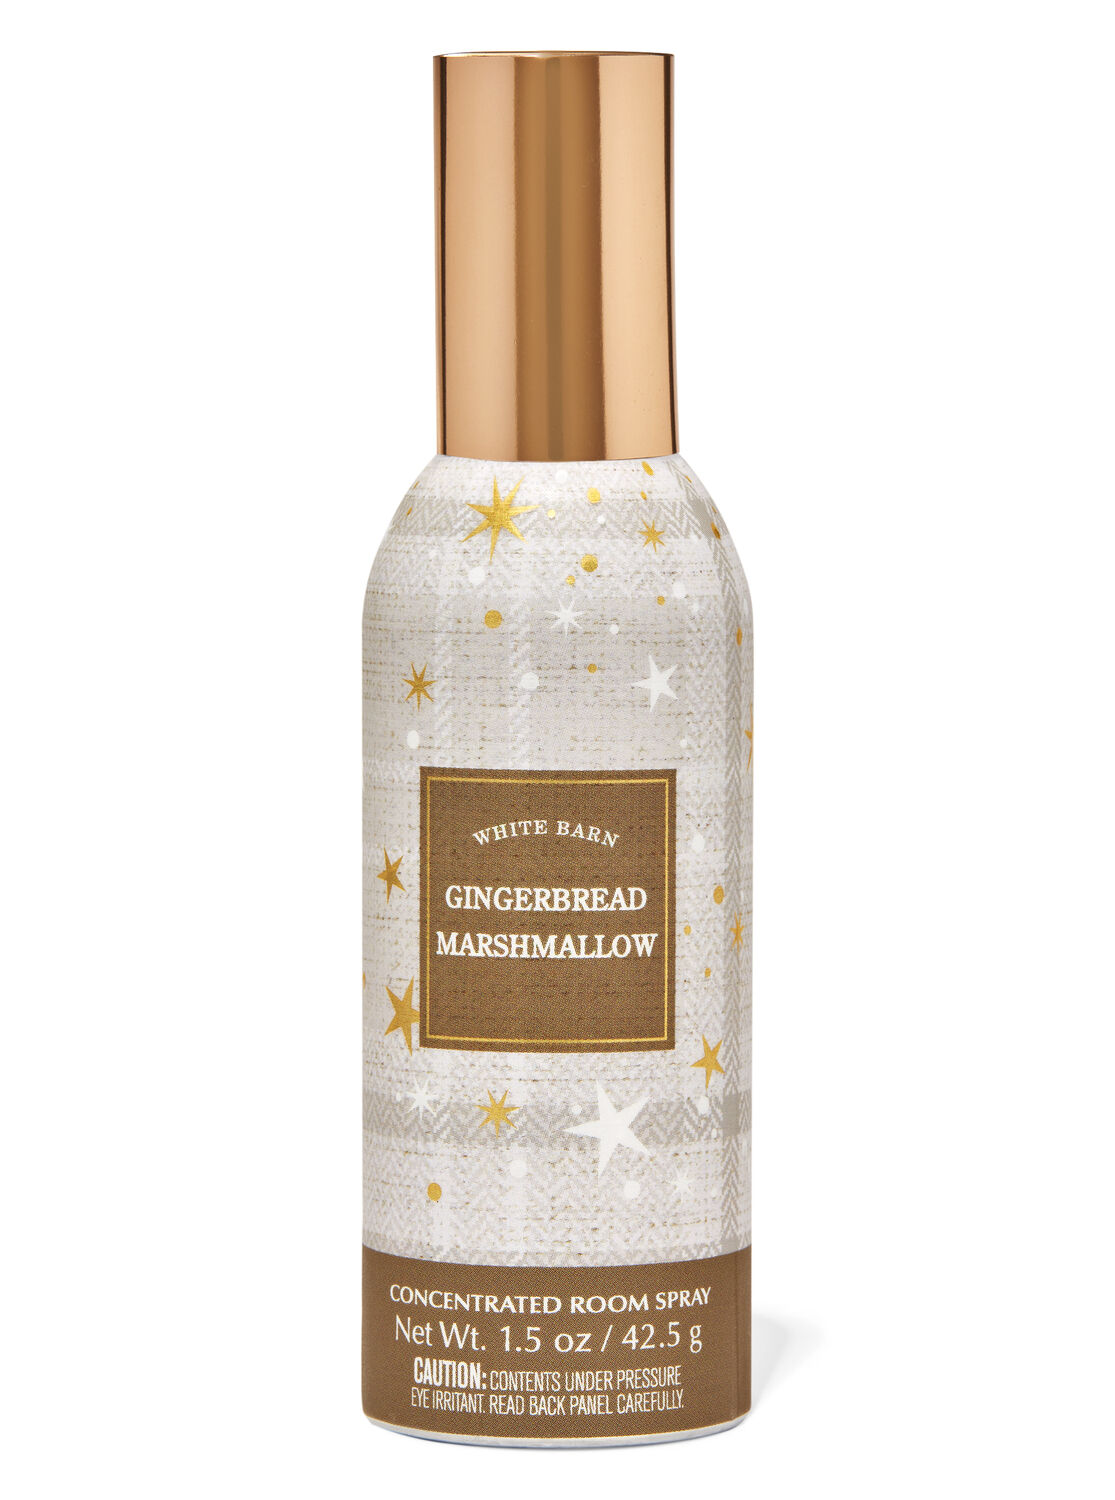 Gingerbread Marshmallow Concentrated Room Spray